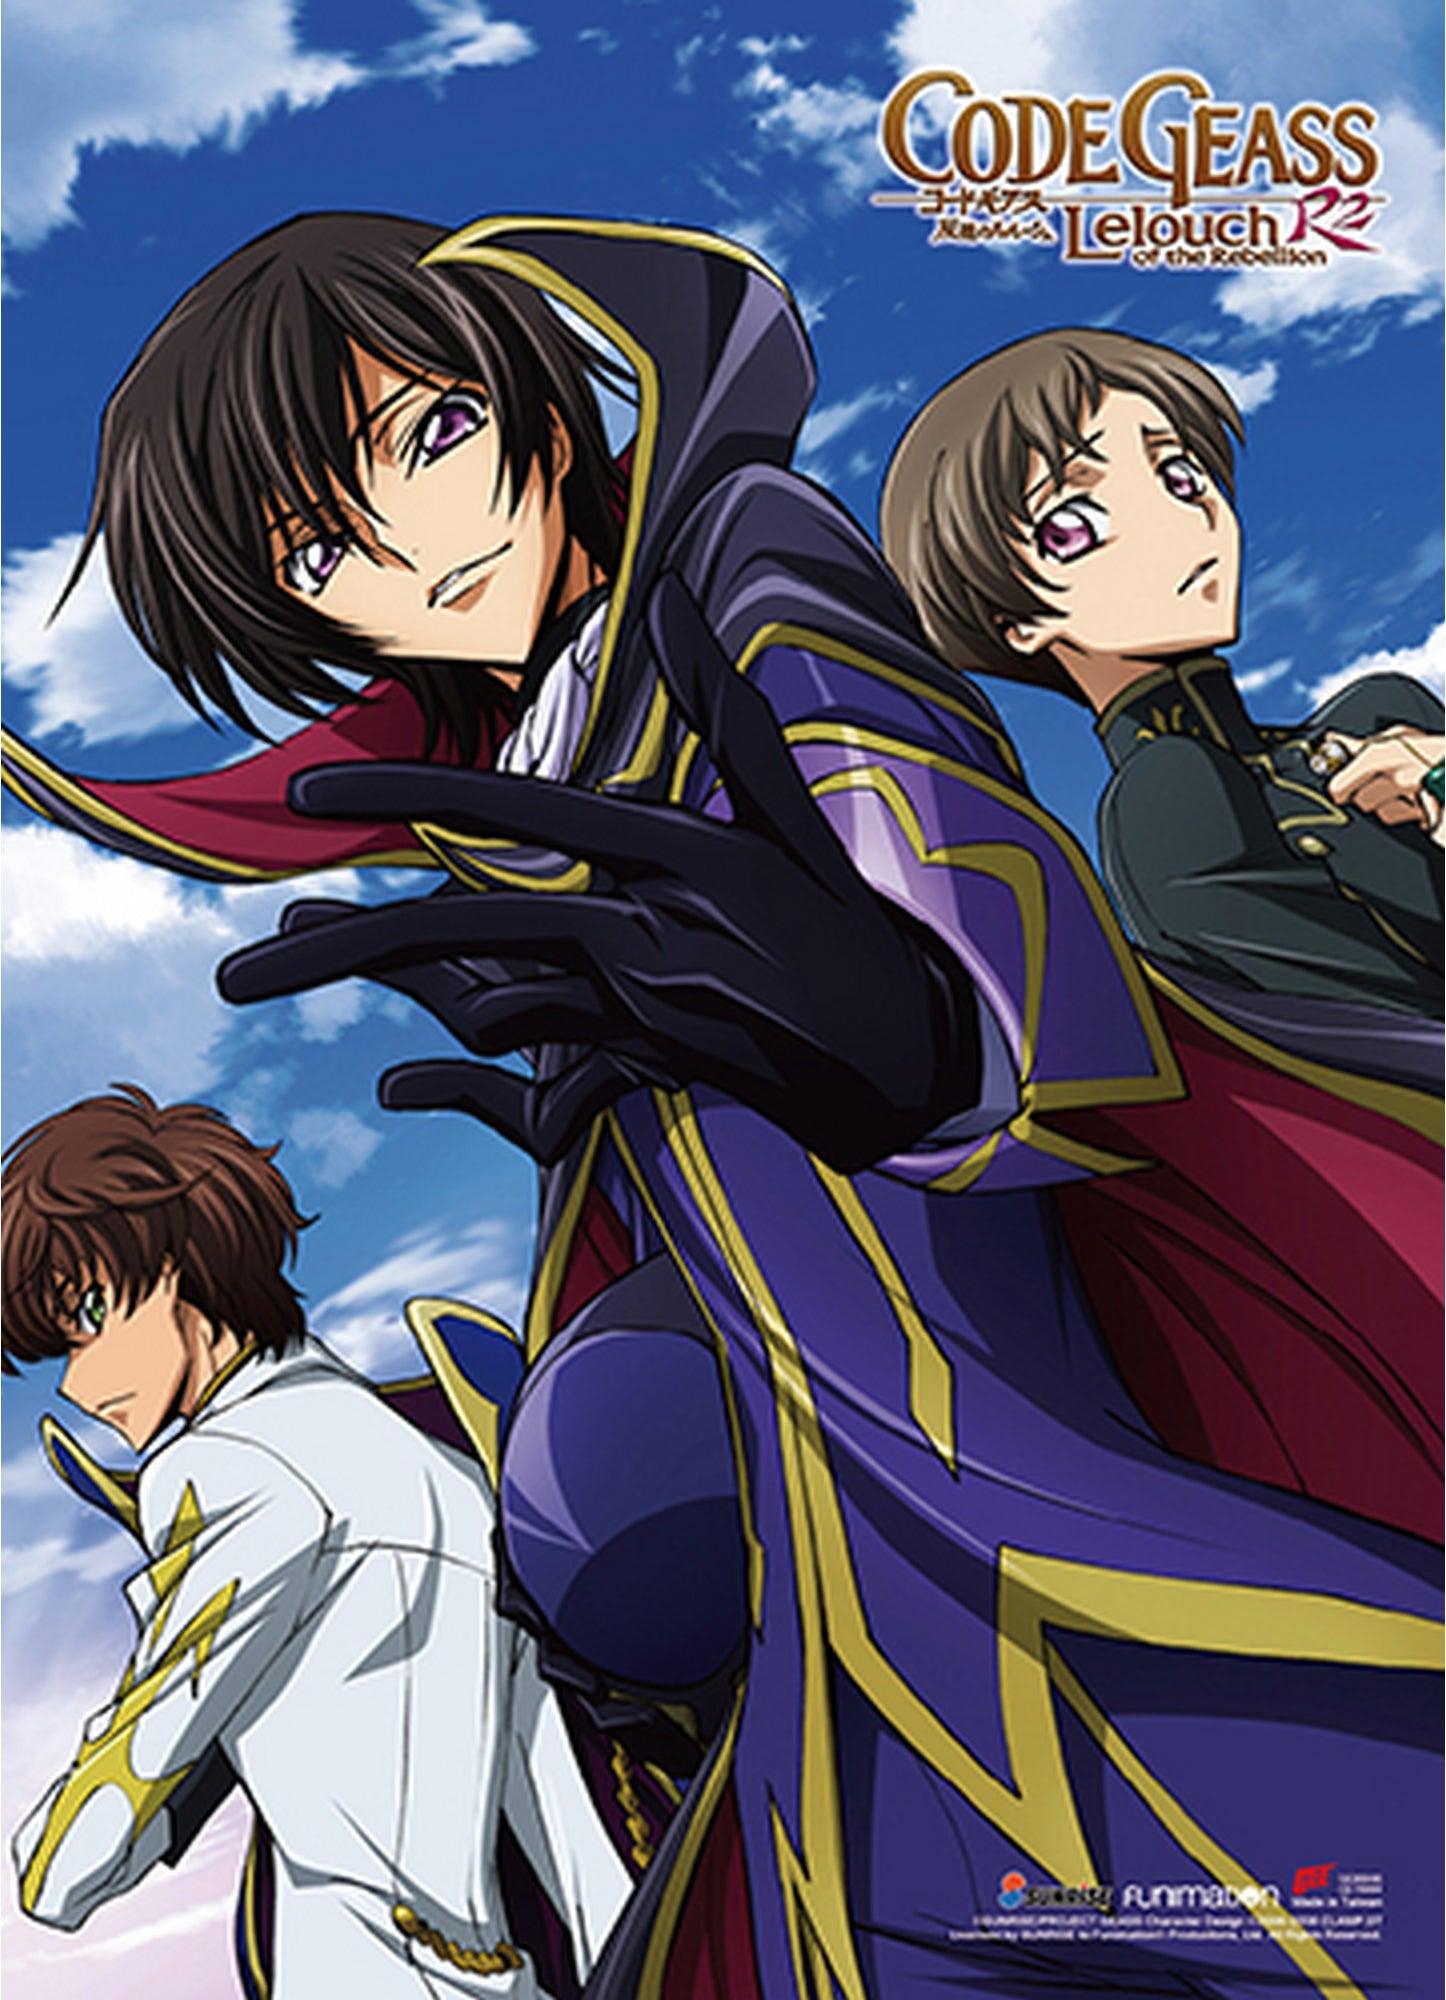 Anime Poster Code Geass CC Lelouch HD Wall Scroll Poster Home